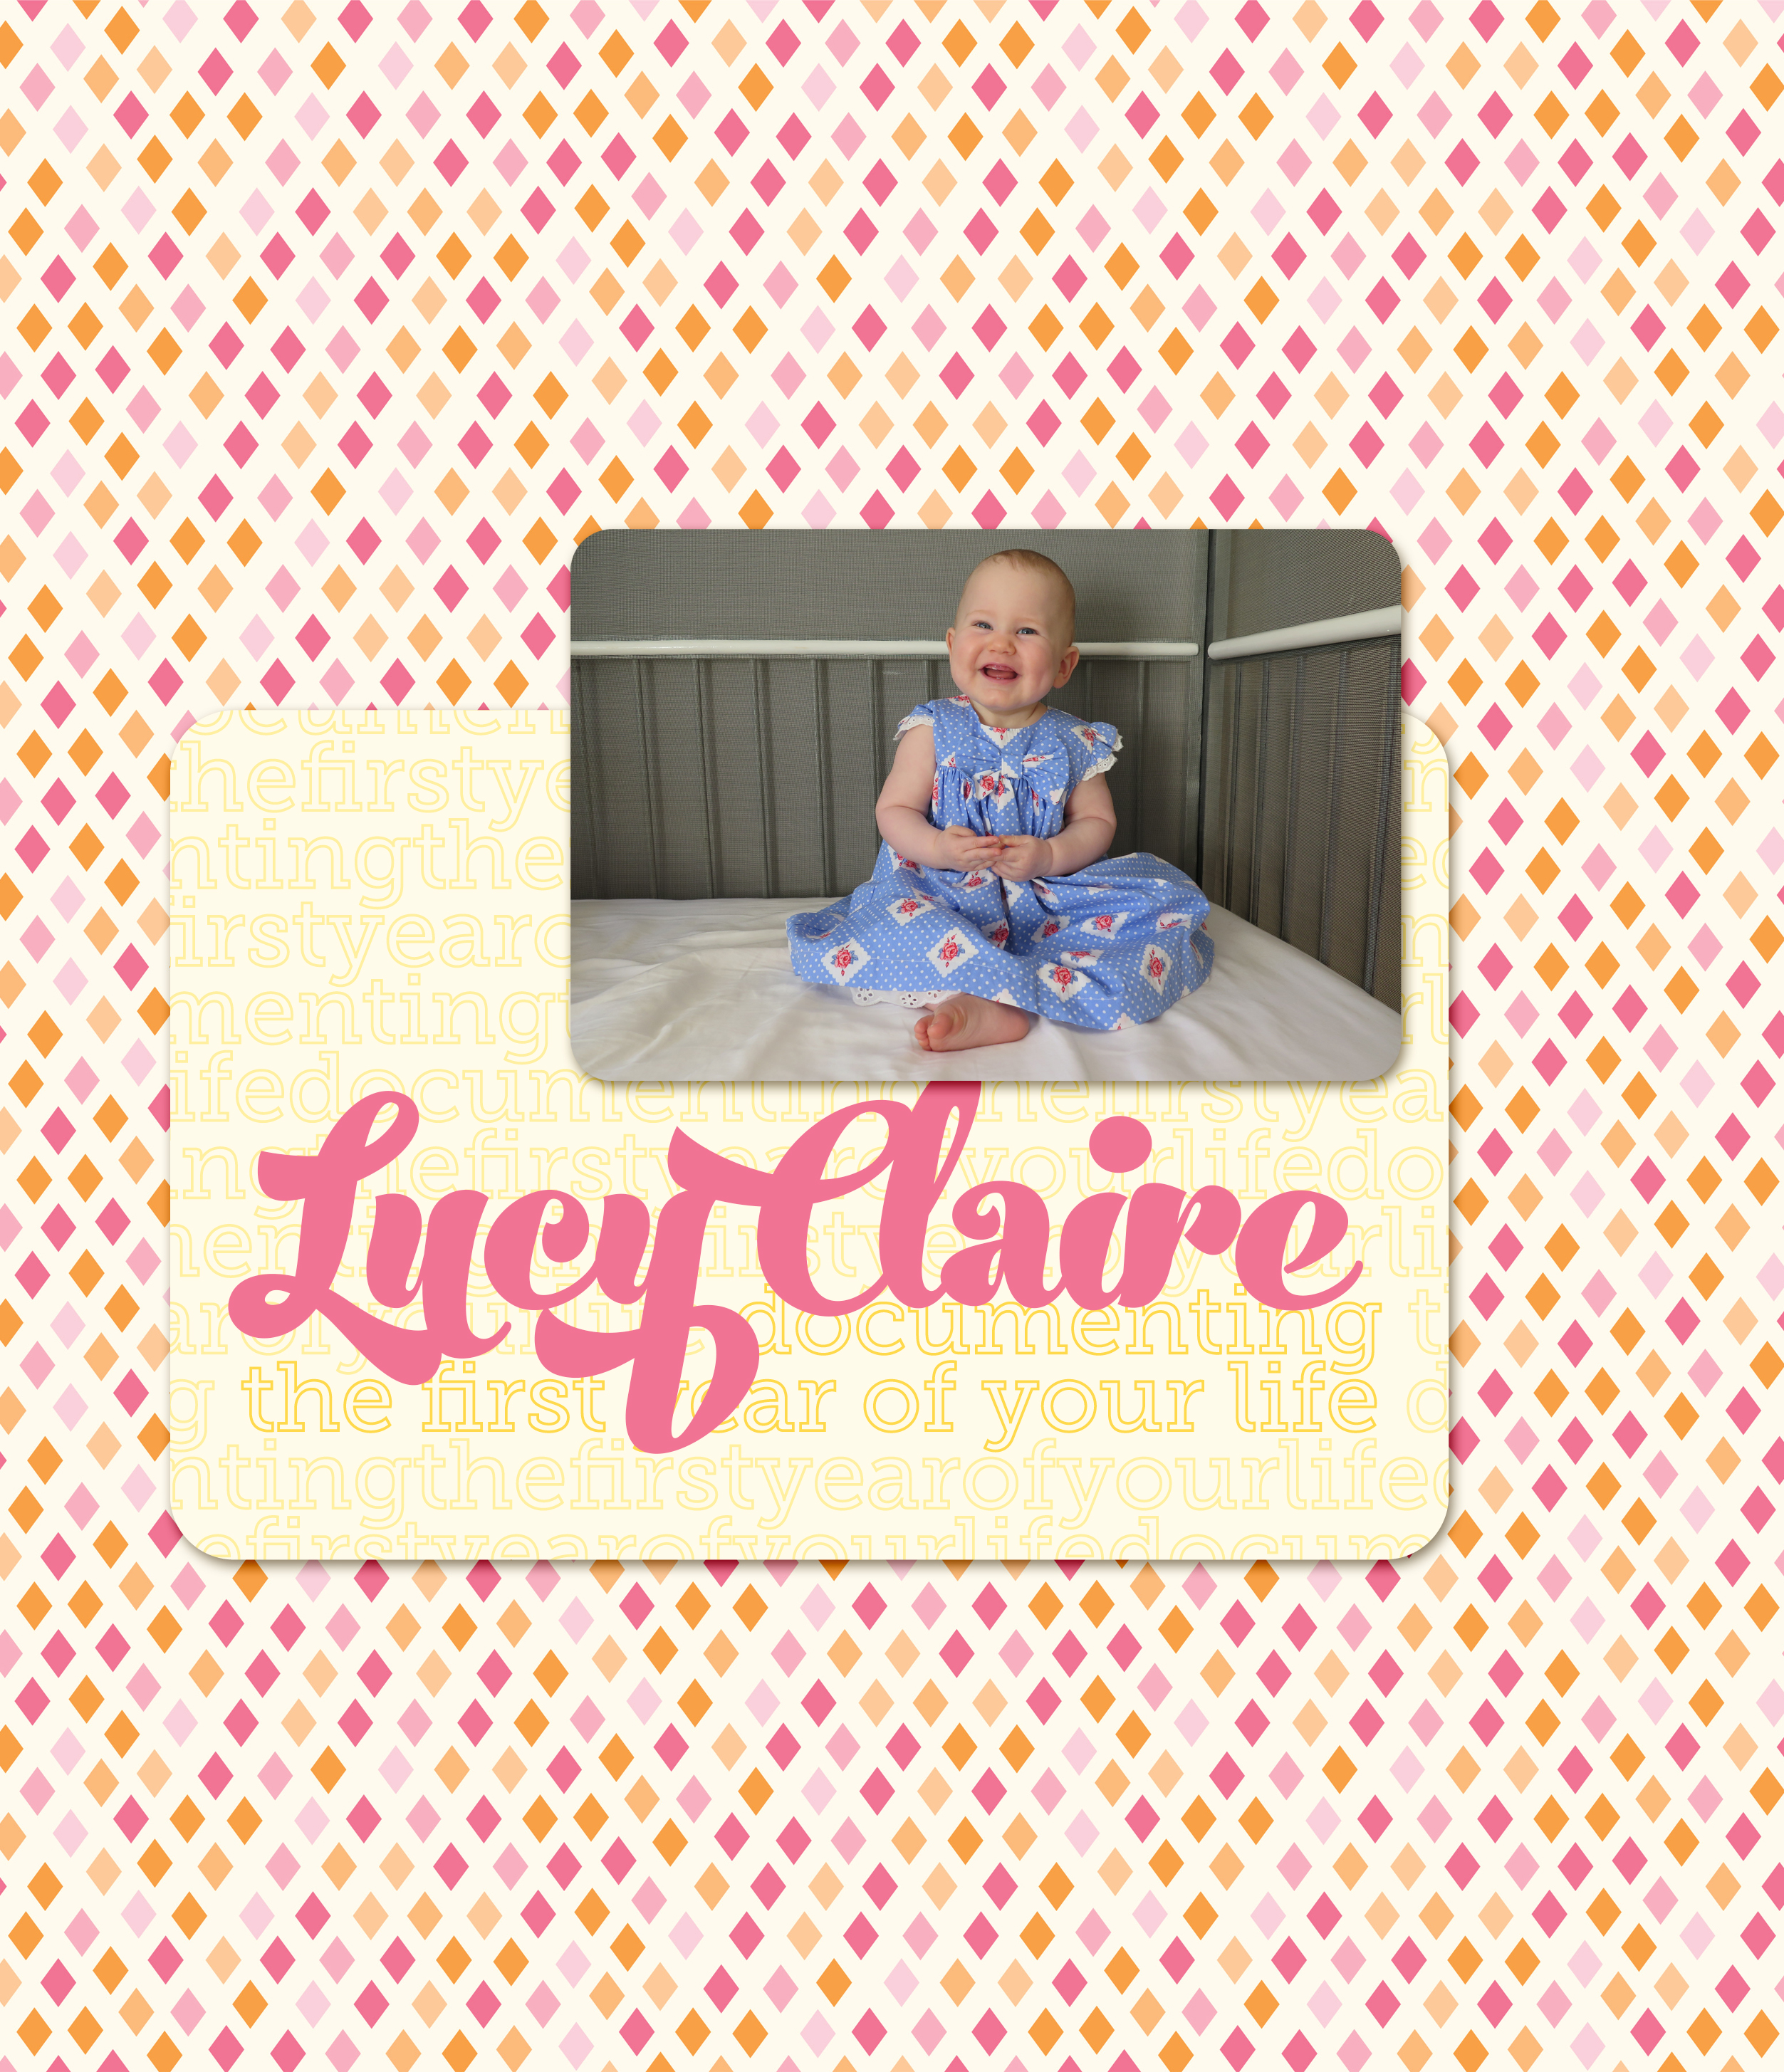 Lucy Claire baby album photo book cover